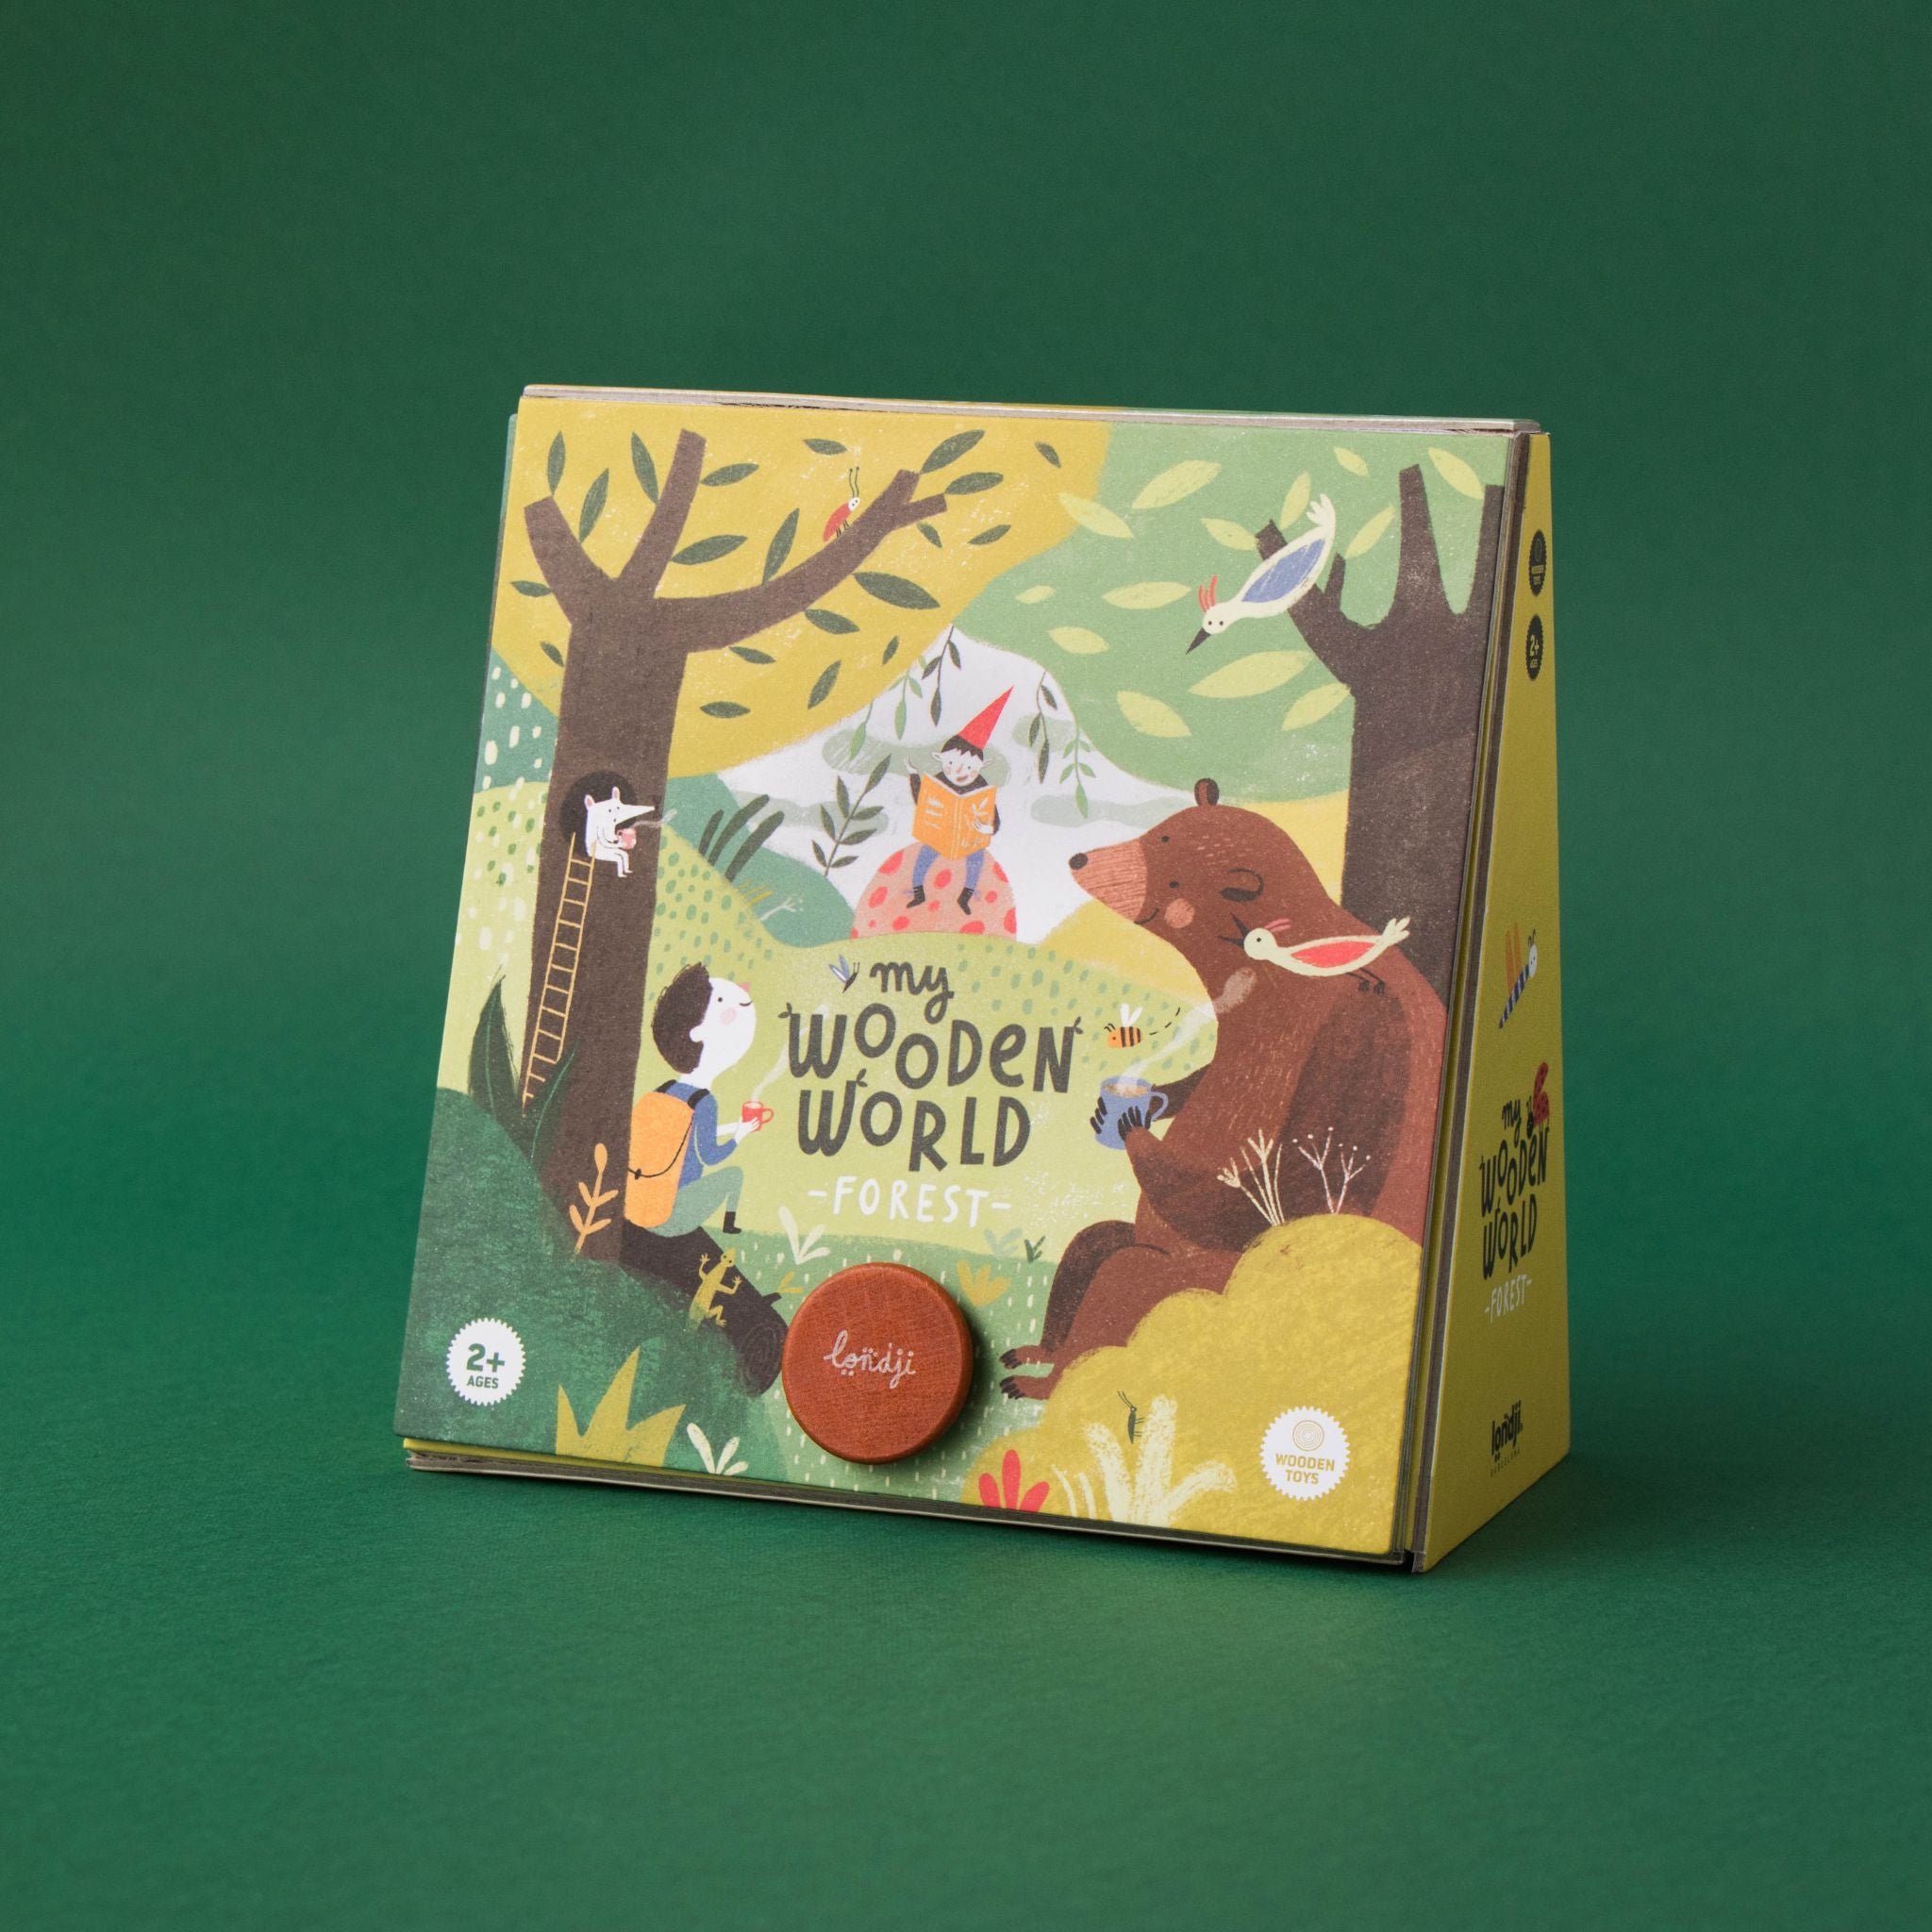 Londji Wooden World Forest Game